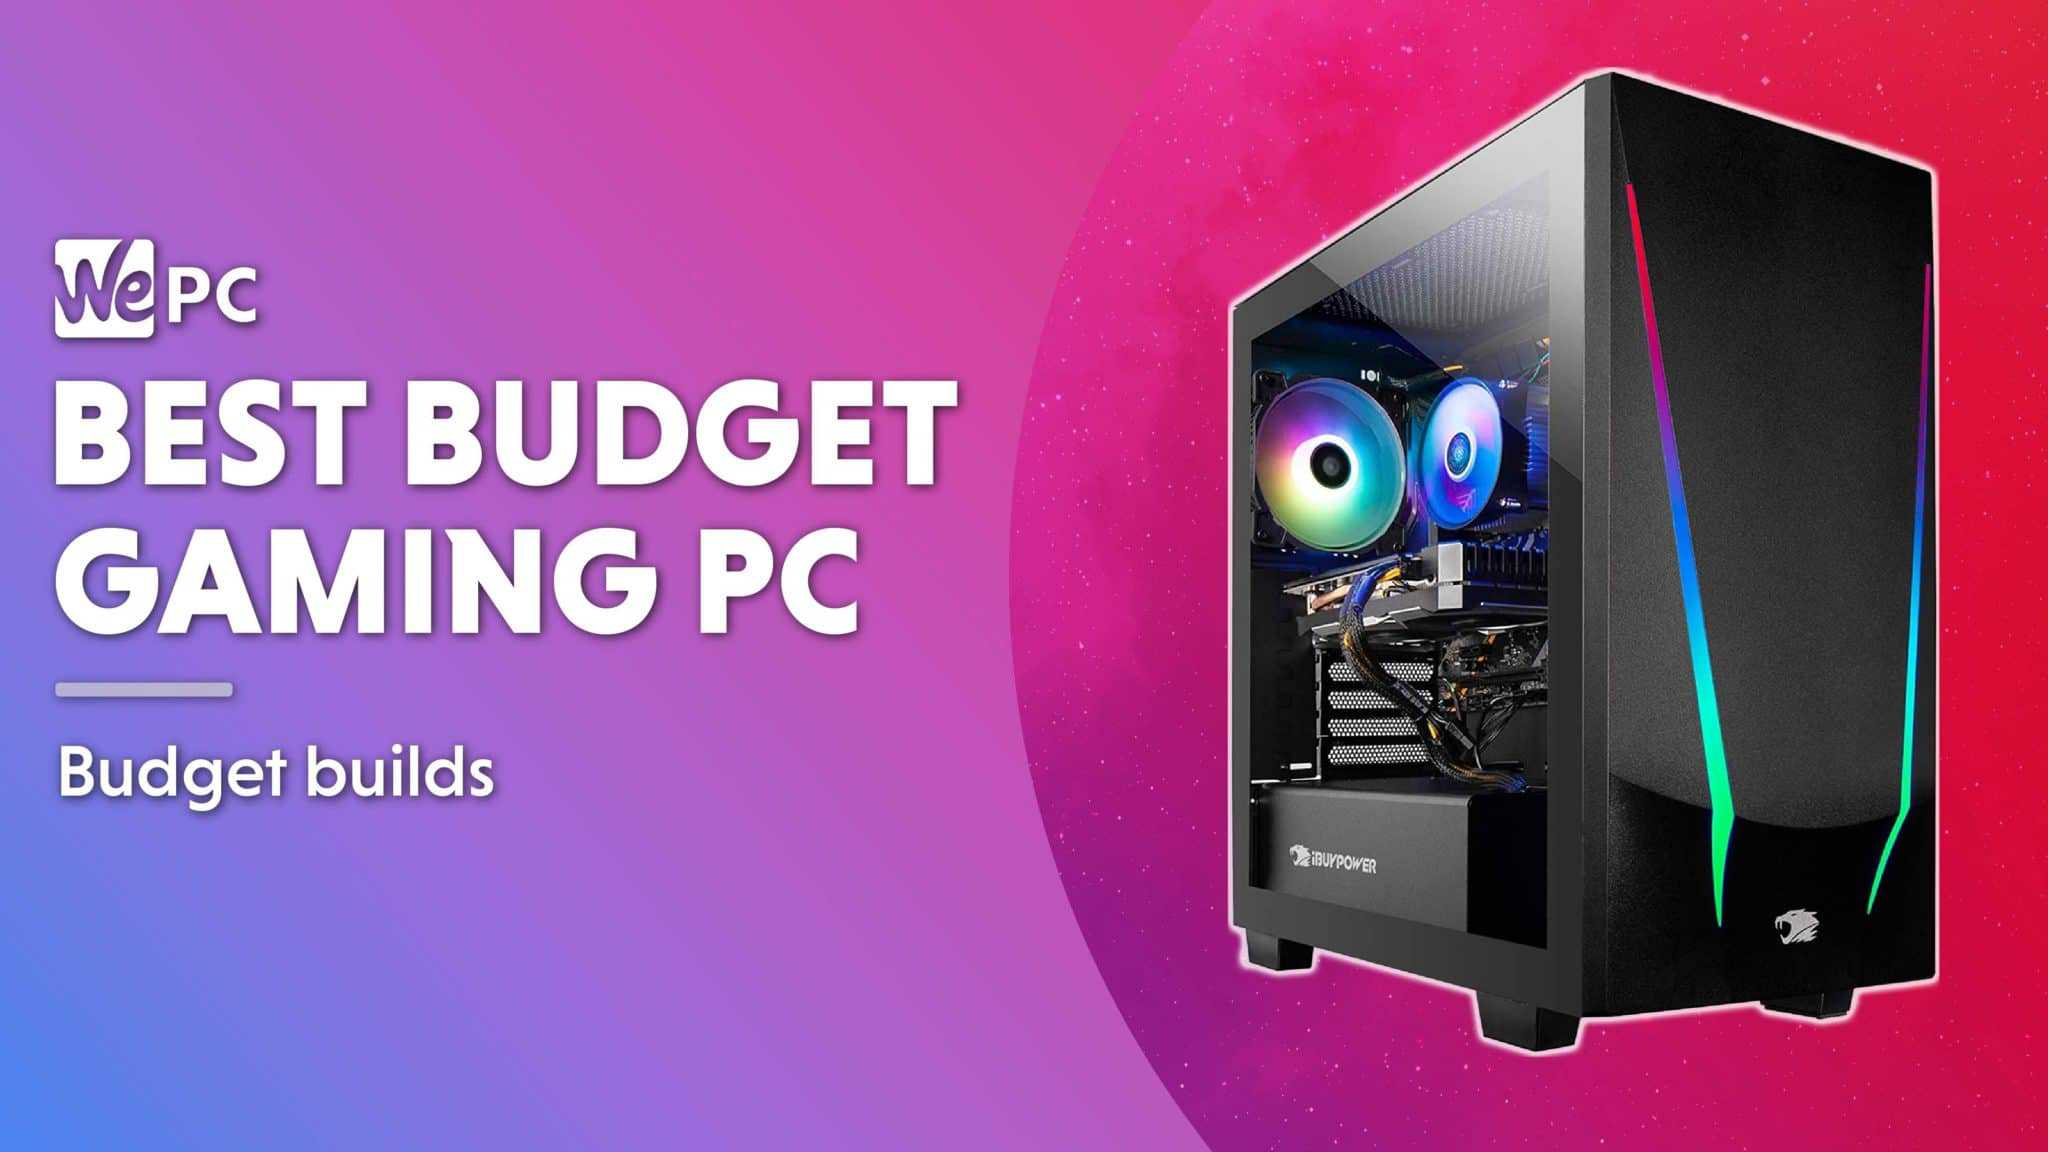 Best Budget Computers Outlet Offers, Save 50 jlcatj.gob.mx